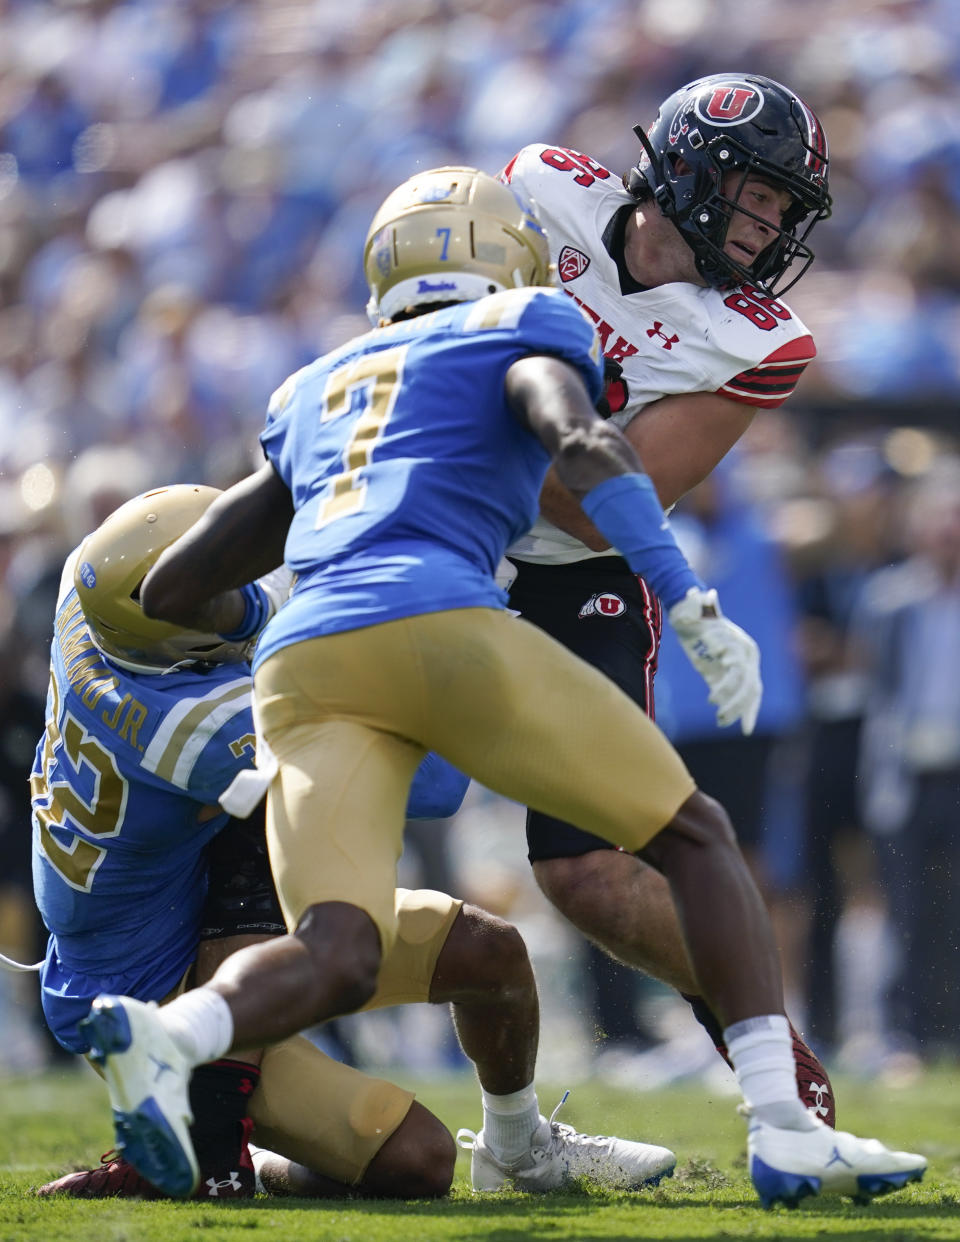 Utah tight end Dalton Kincaid (86) is tackled by UCLA defensive back William Nimmo Jr. (32) and defensive back Mo Osling III (7) during the first half of an NCAA college football game in Pasadena, Calif., Saturday, Oct. 8, 2022. (AP Photo/Ashley Landis)